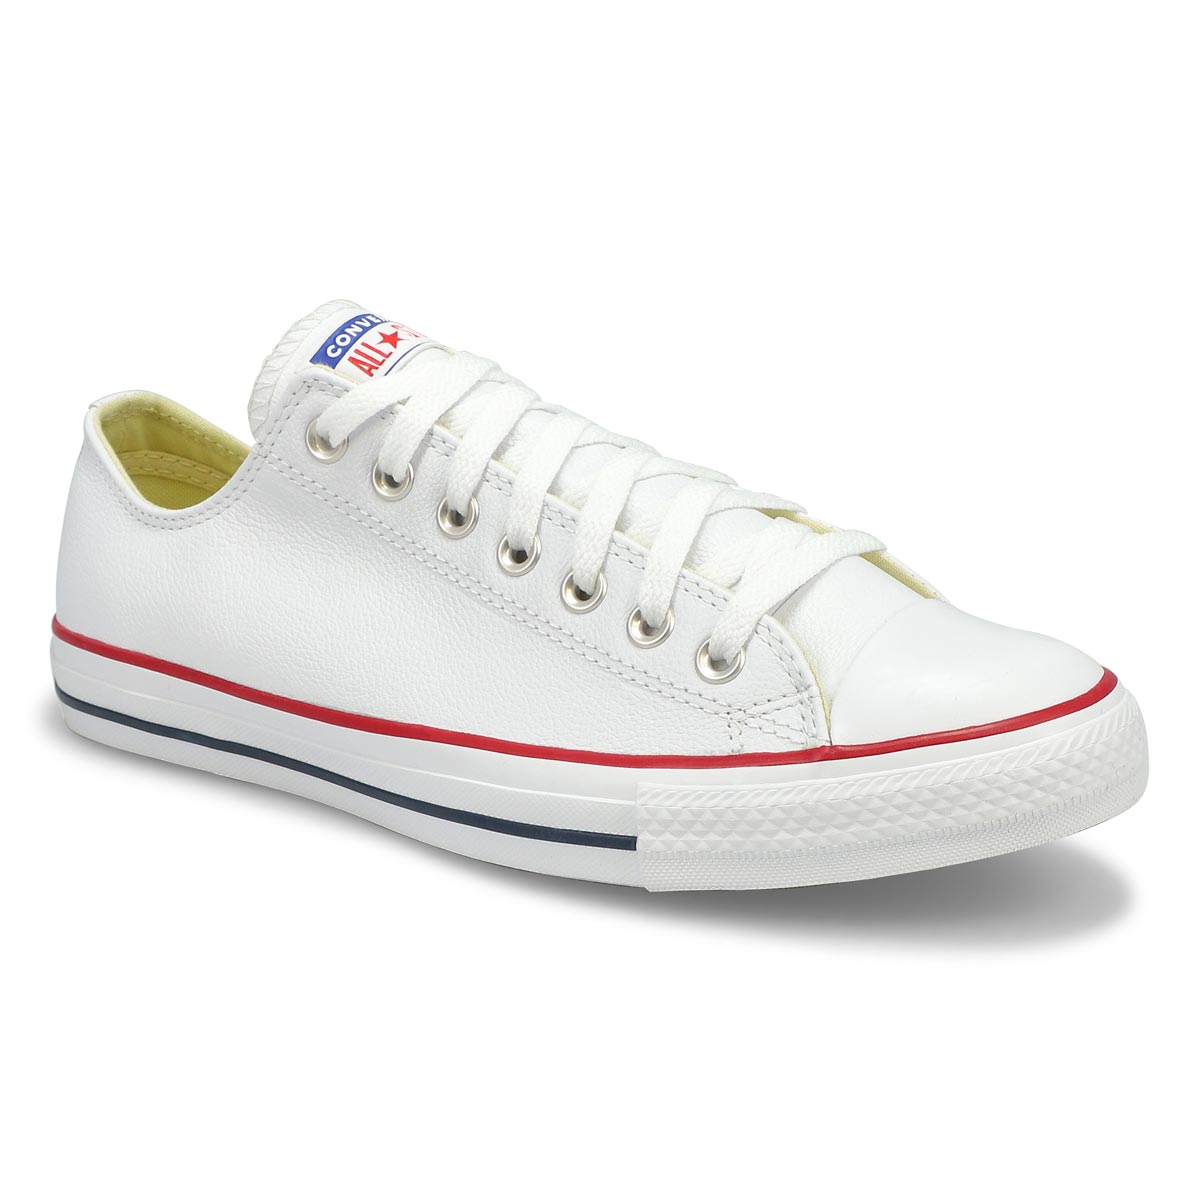 converse all star leather ox shoes